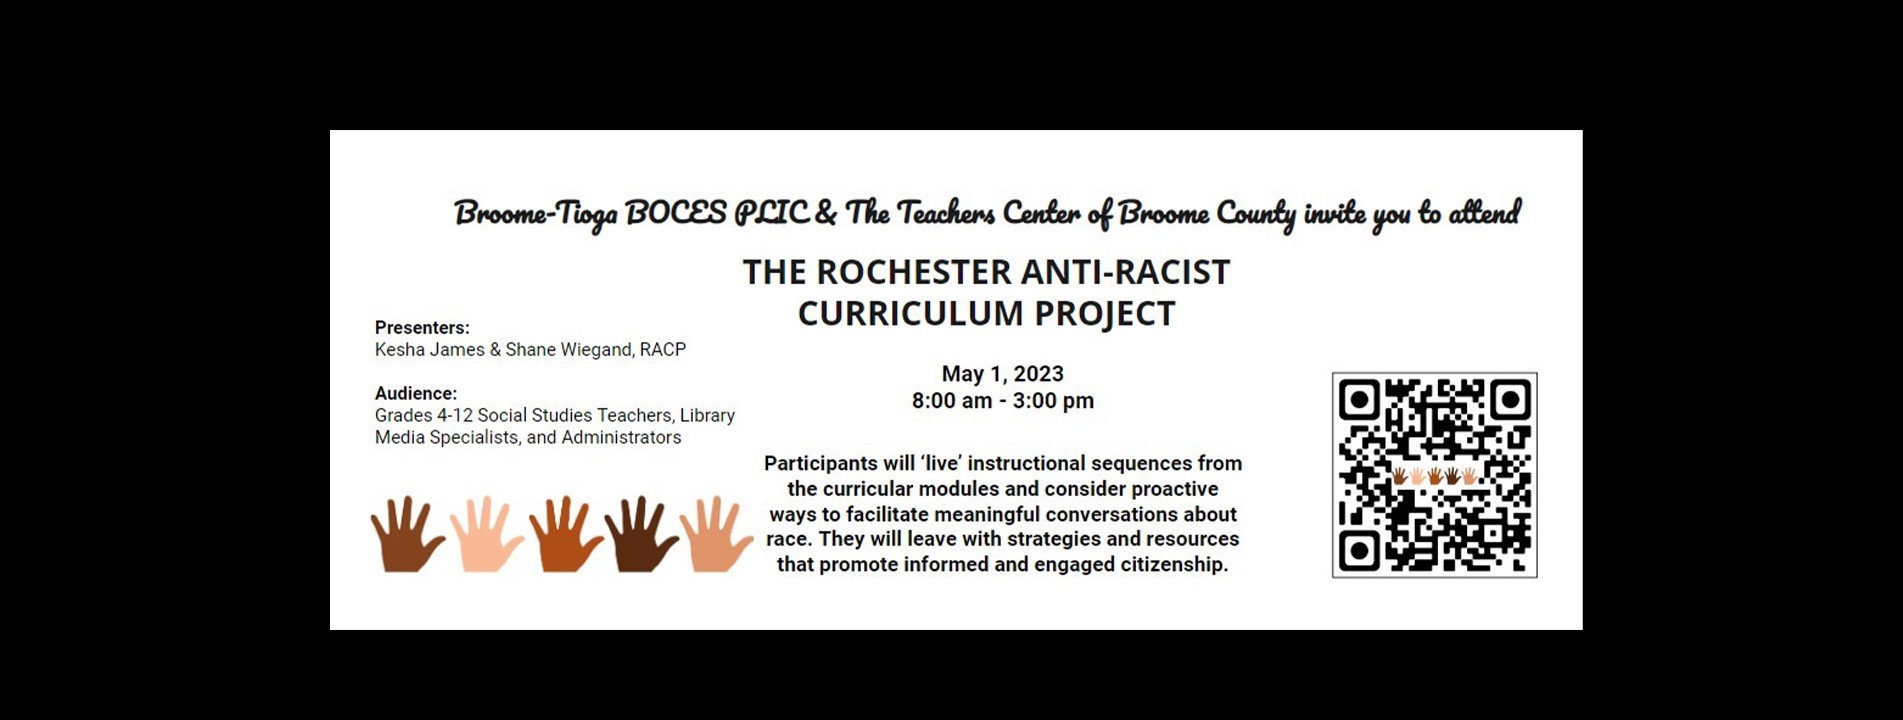 The Rochester Anti-Racist Curriculum Project, May 1, 2023 from 8 am - 3 pm. Overview: Participants will ‘live’ instructional sequences from the curricular modules and consider proactive ways to facilitate meaningful conversations about race. They will leave with strategies and resources that promote informed and engaged citizenship.